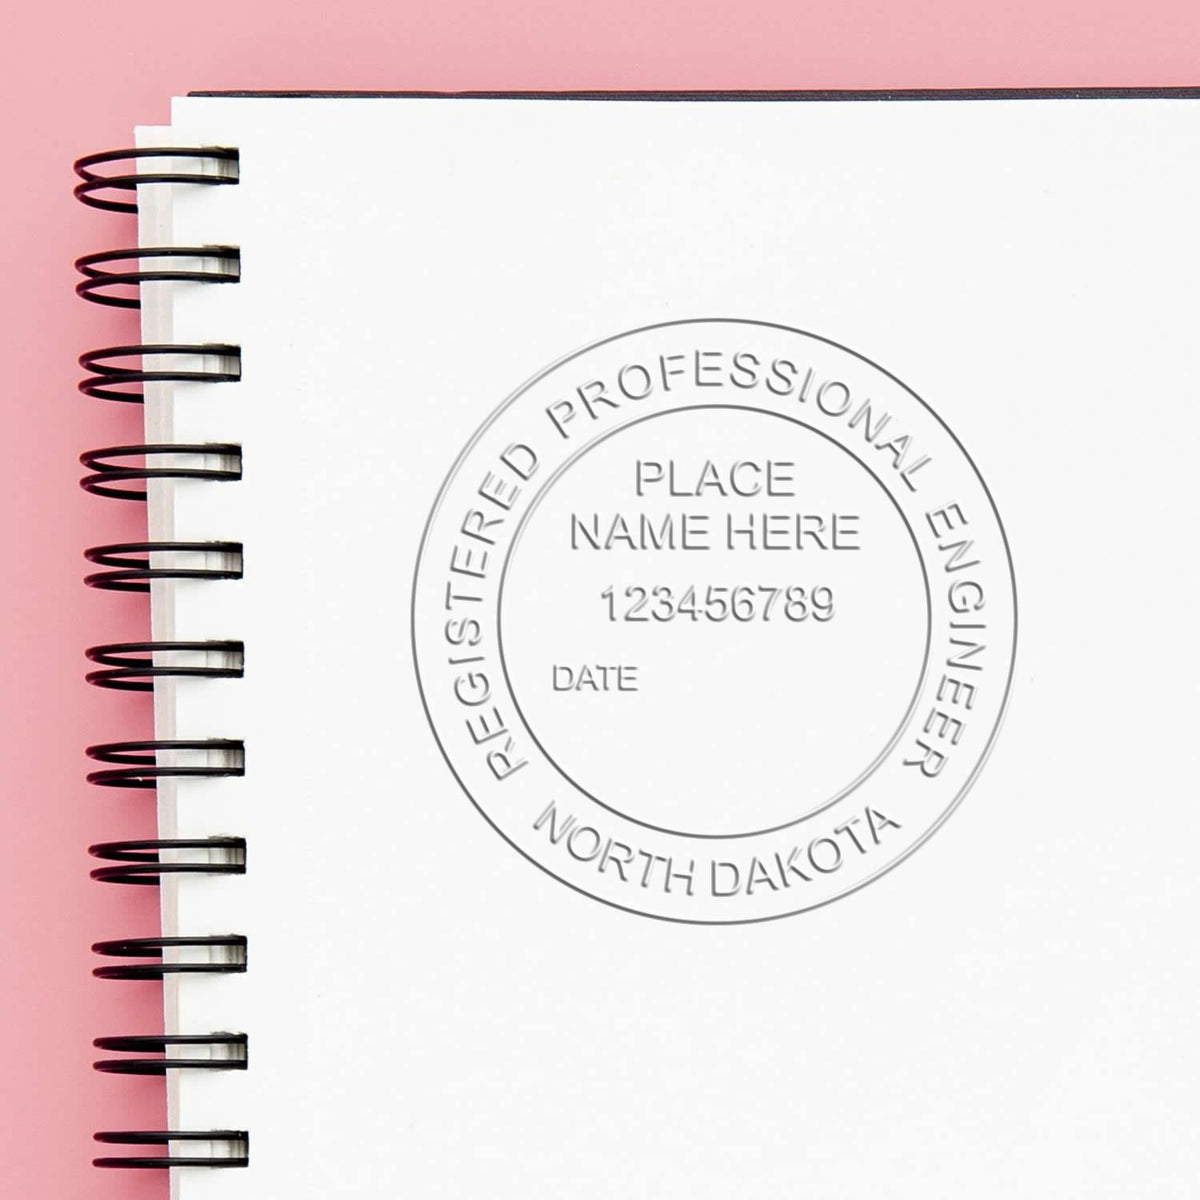 A photograph of the Soft North Dakota Professional Engineer Seal stamp impression reveals a vivid, professional image of the on paper.